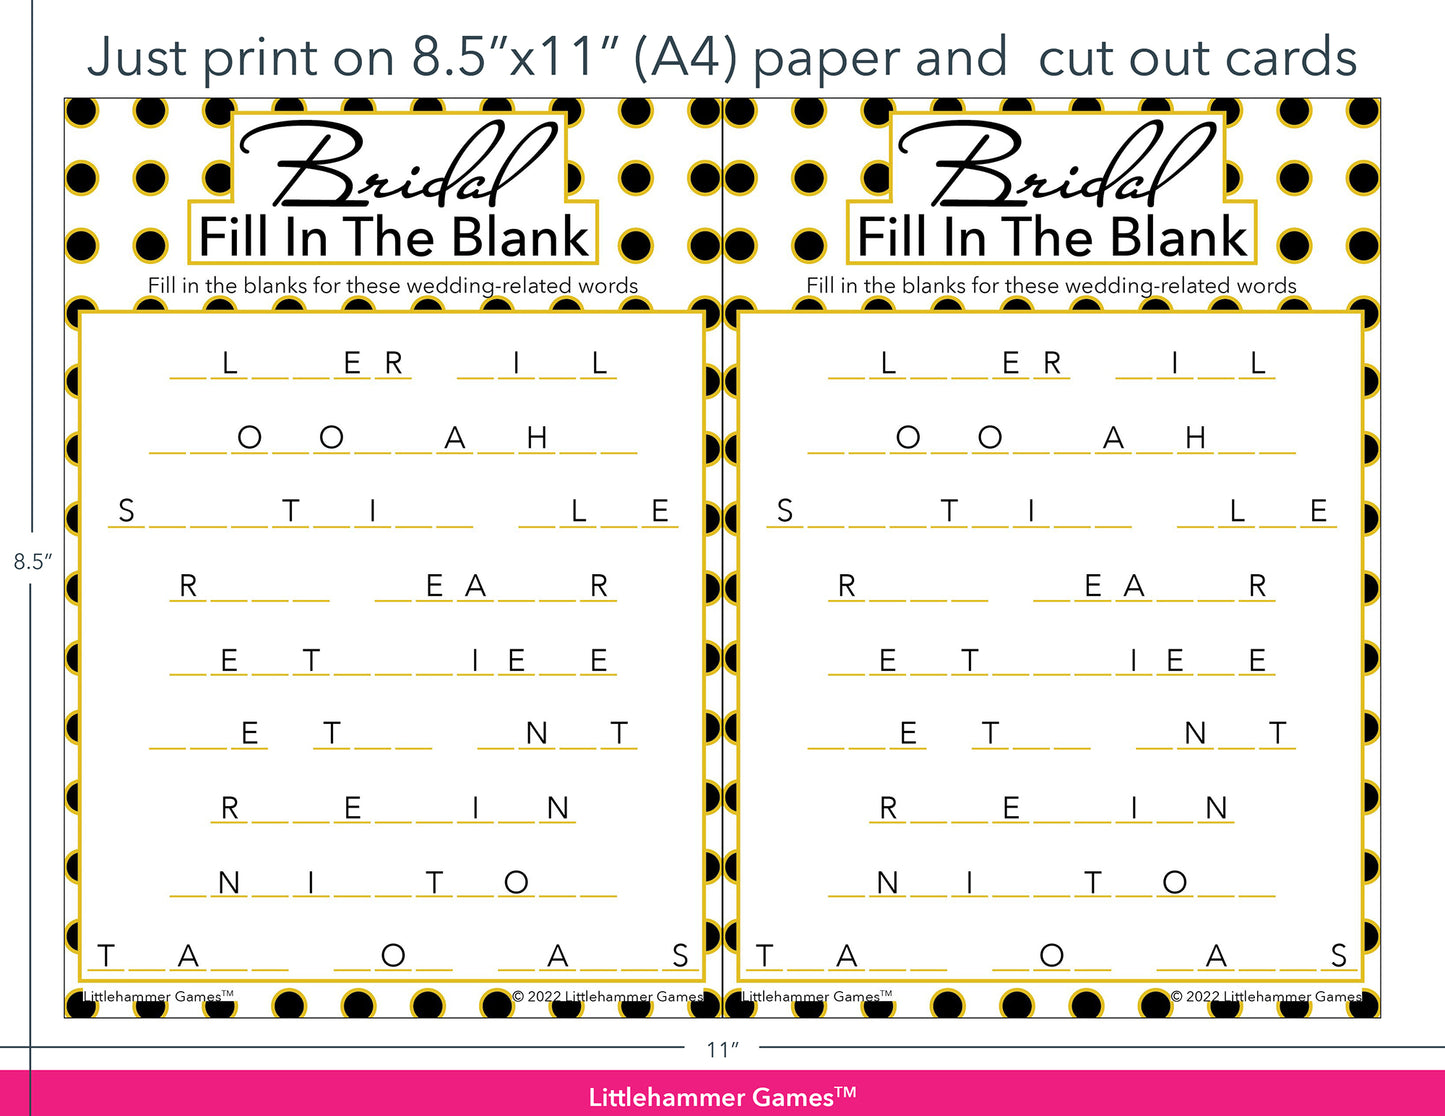 Bridal Fill in the Blank black and gold polka dot game cards with printing instructions